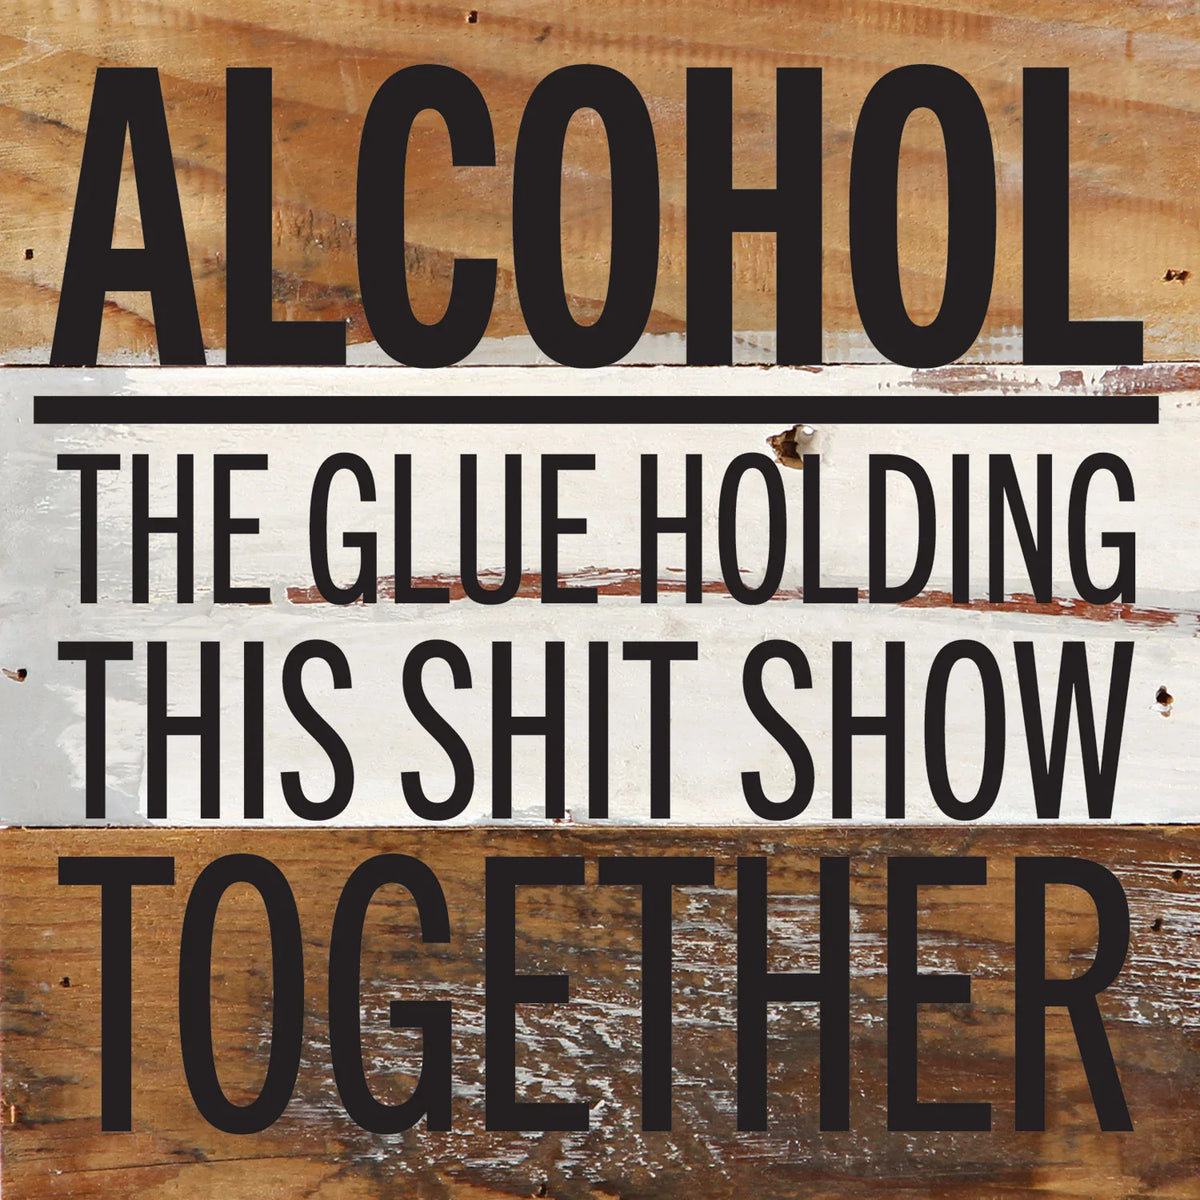 Alcohol. The glue holding this shit show together / 6x6 Reclaimed Wood Wall Decor